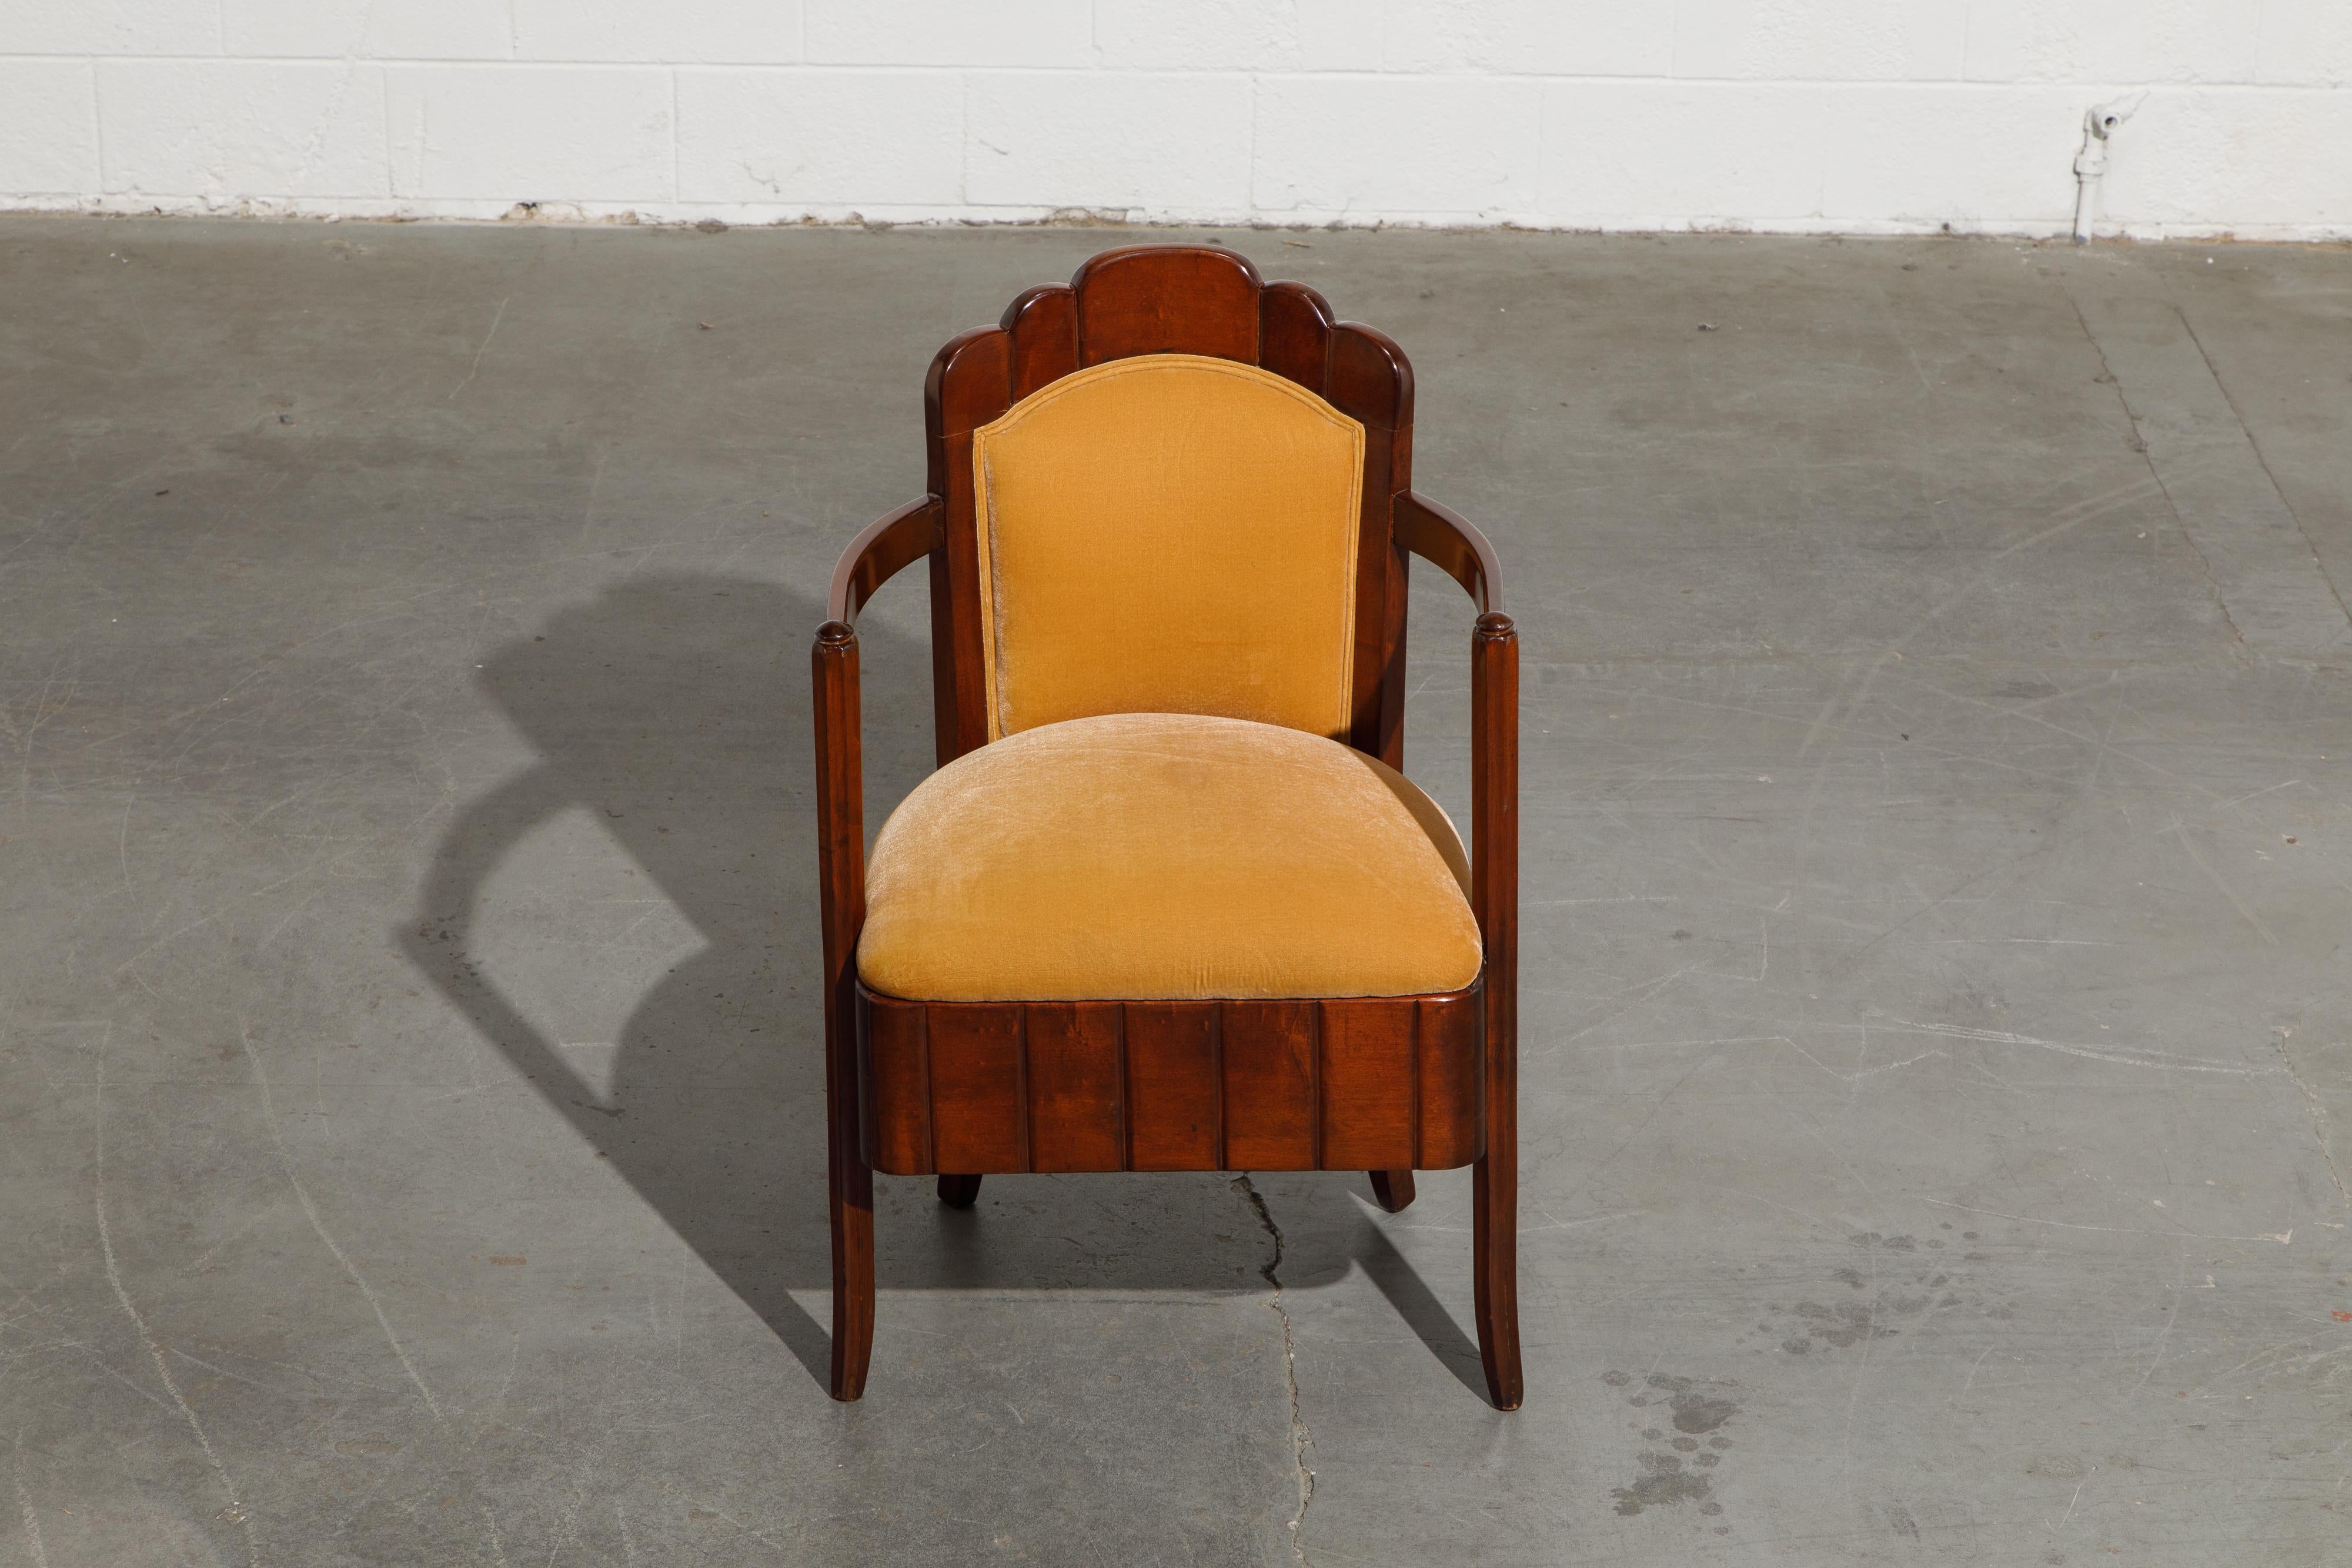 Important Pierre Patout Mahogany Dining Chairs from S.S. Île de France, c. 1927 For Sale 2